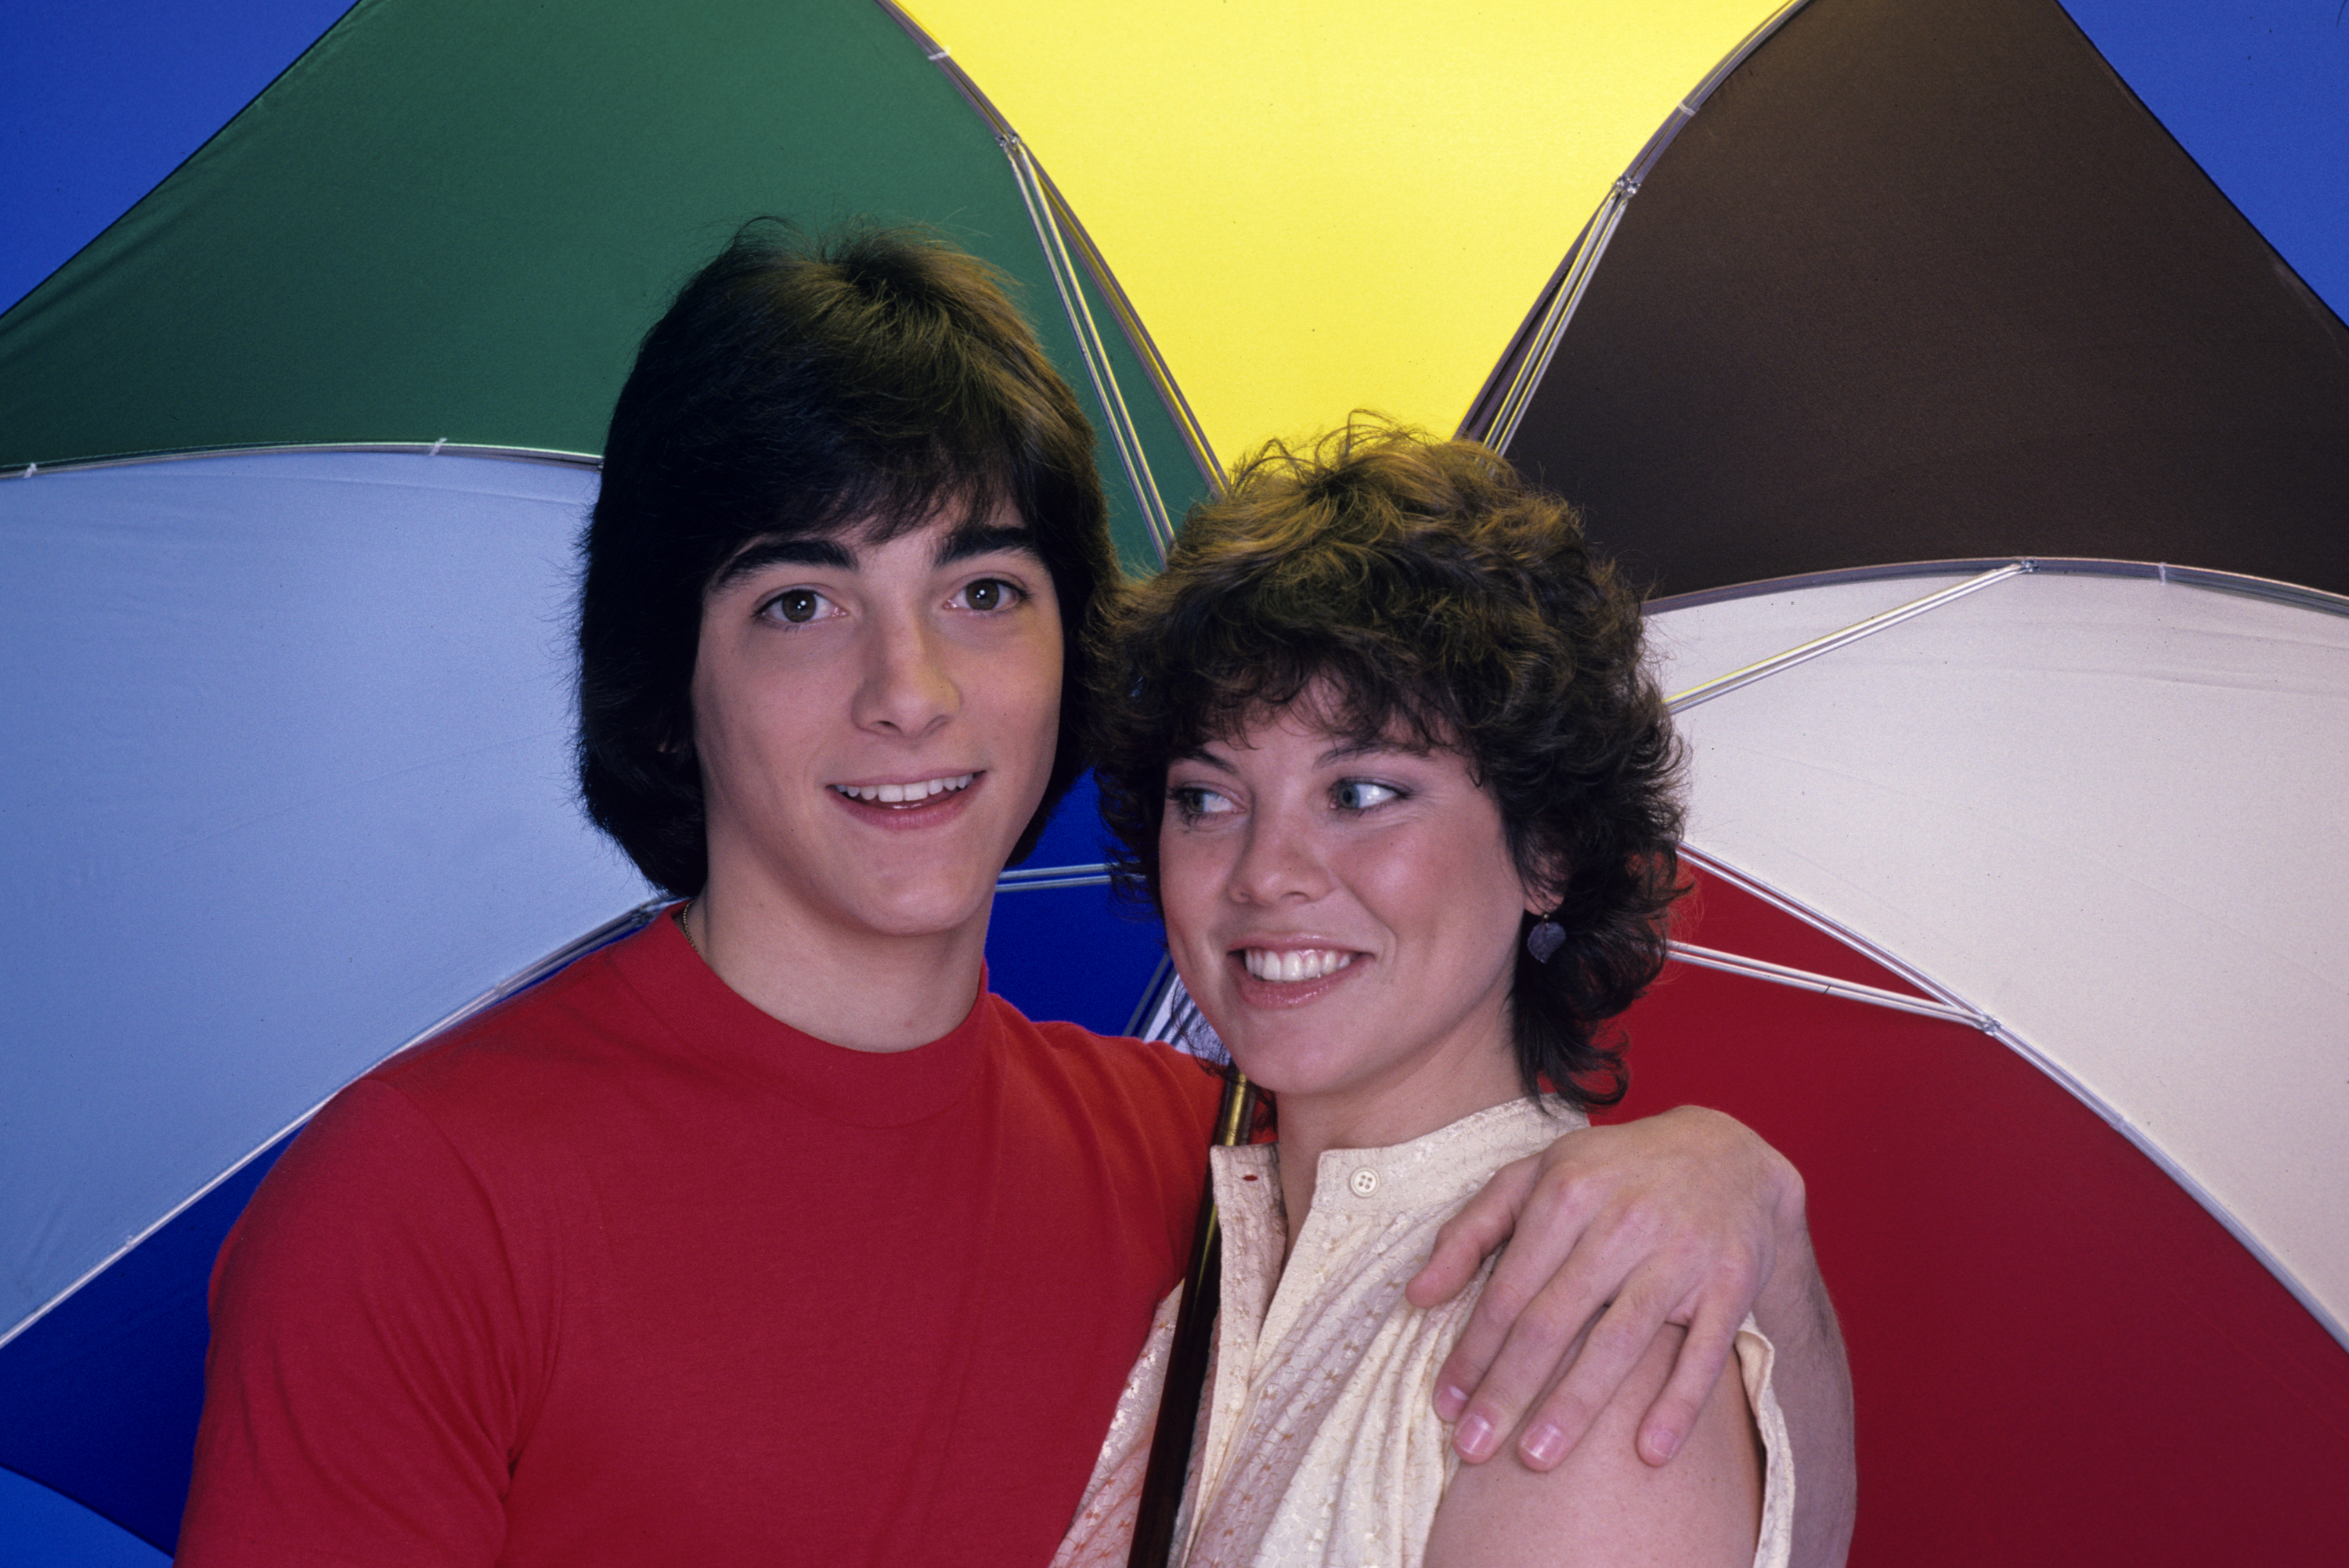 Soctt Baio and Erin Moran on "Joanie Loves Chachi" in 1982 | Source: Getty Images